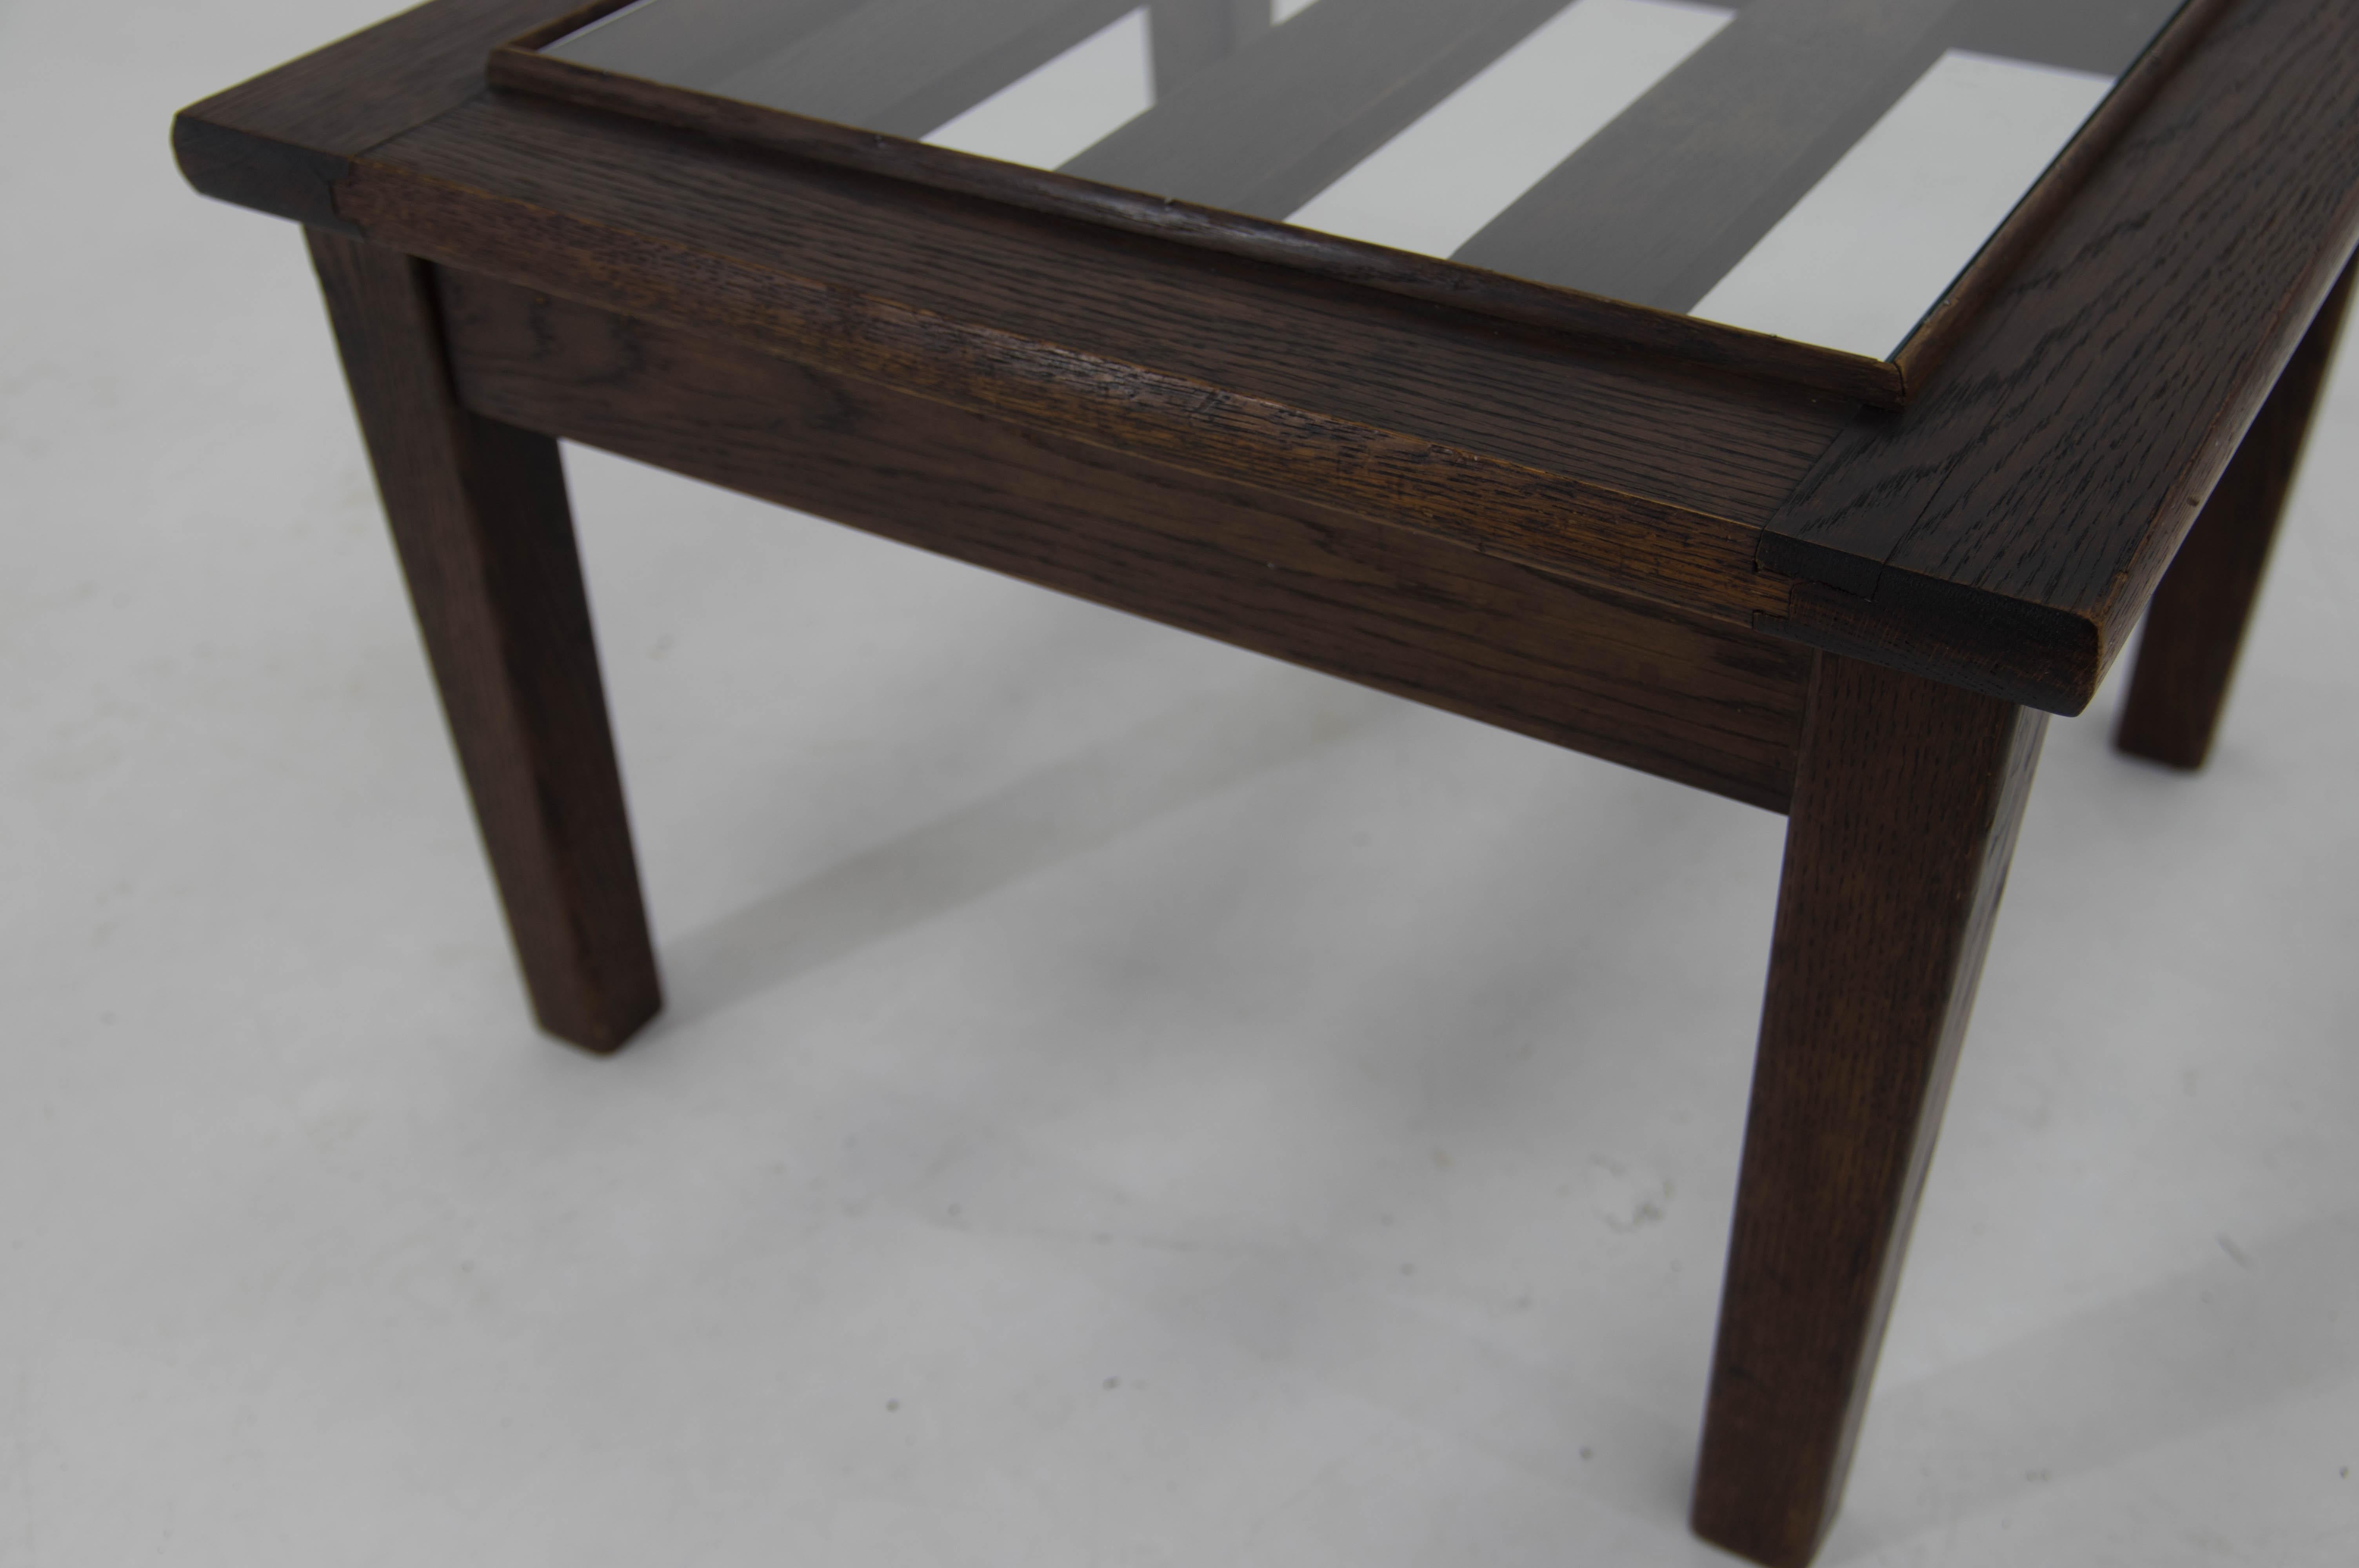 Rare Functionalist Side Table by Antonin Heythum, 1930s For Sale 1